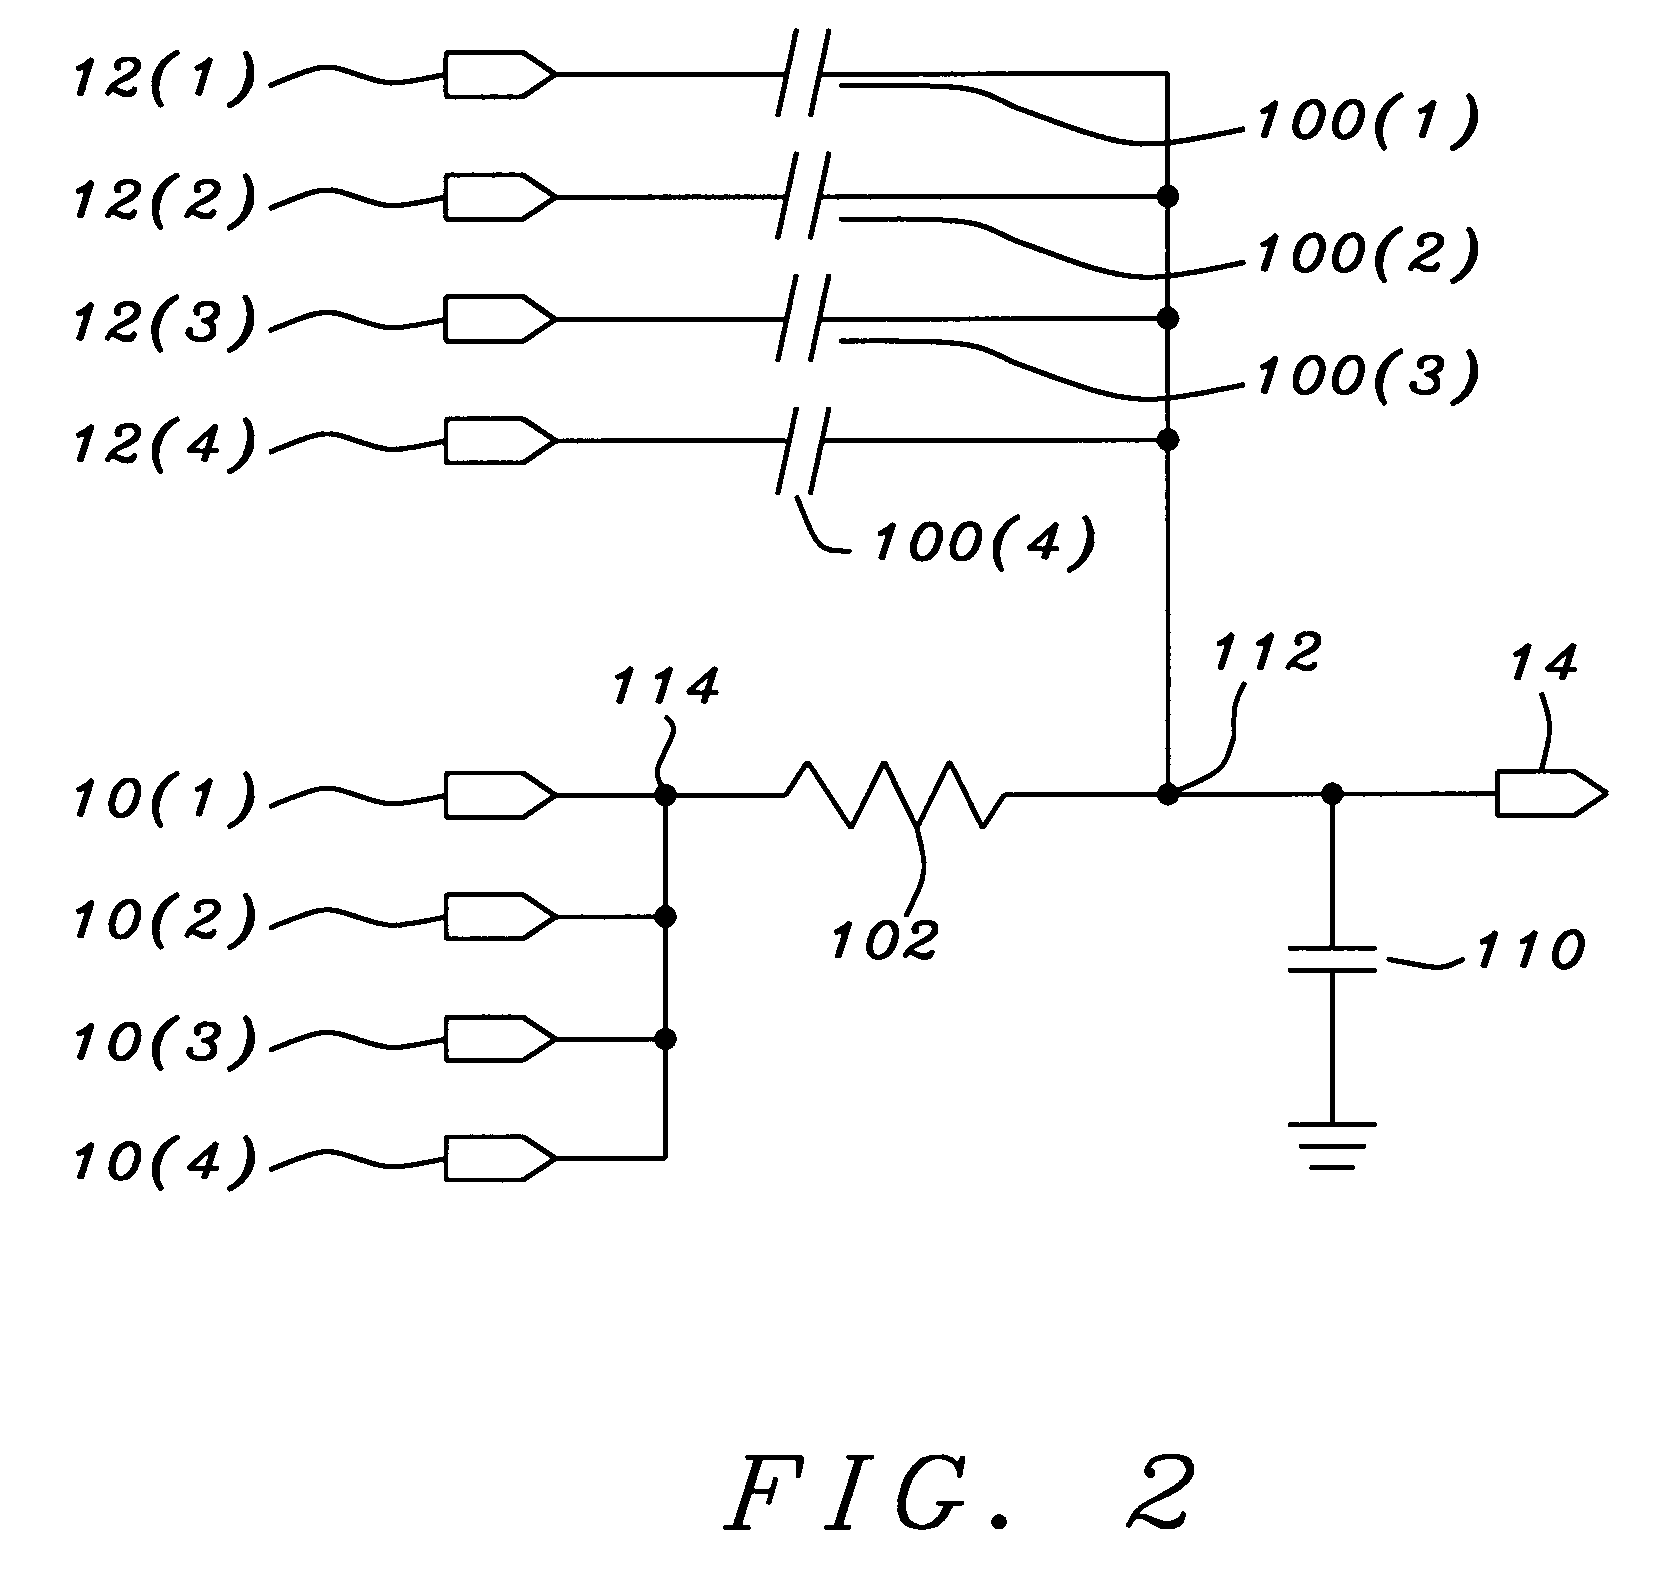 CMOS APS readout scheme that combines reset drain current and the source follower output